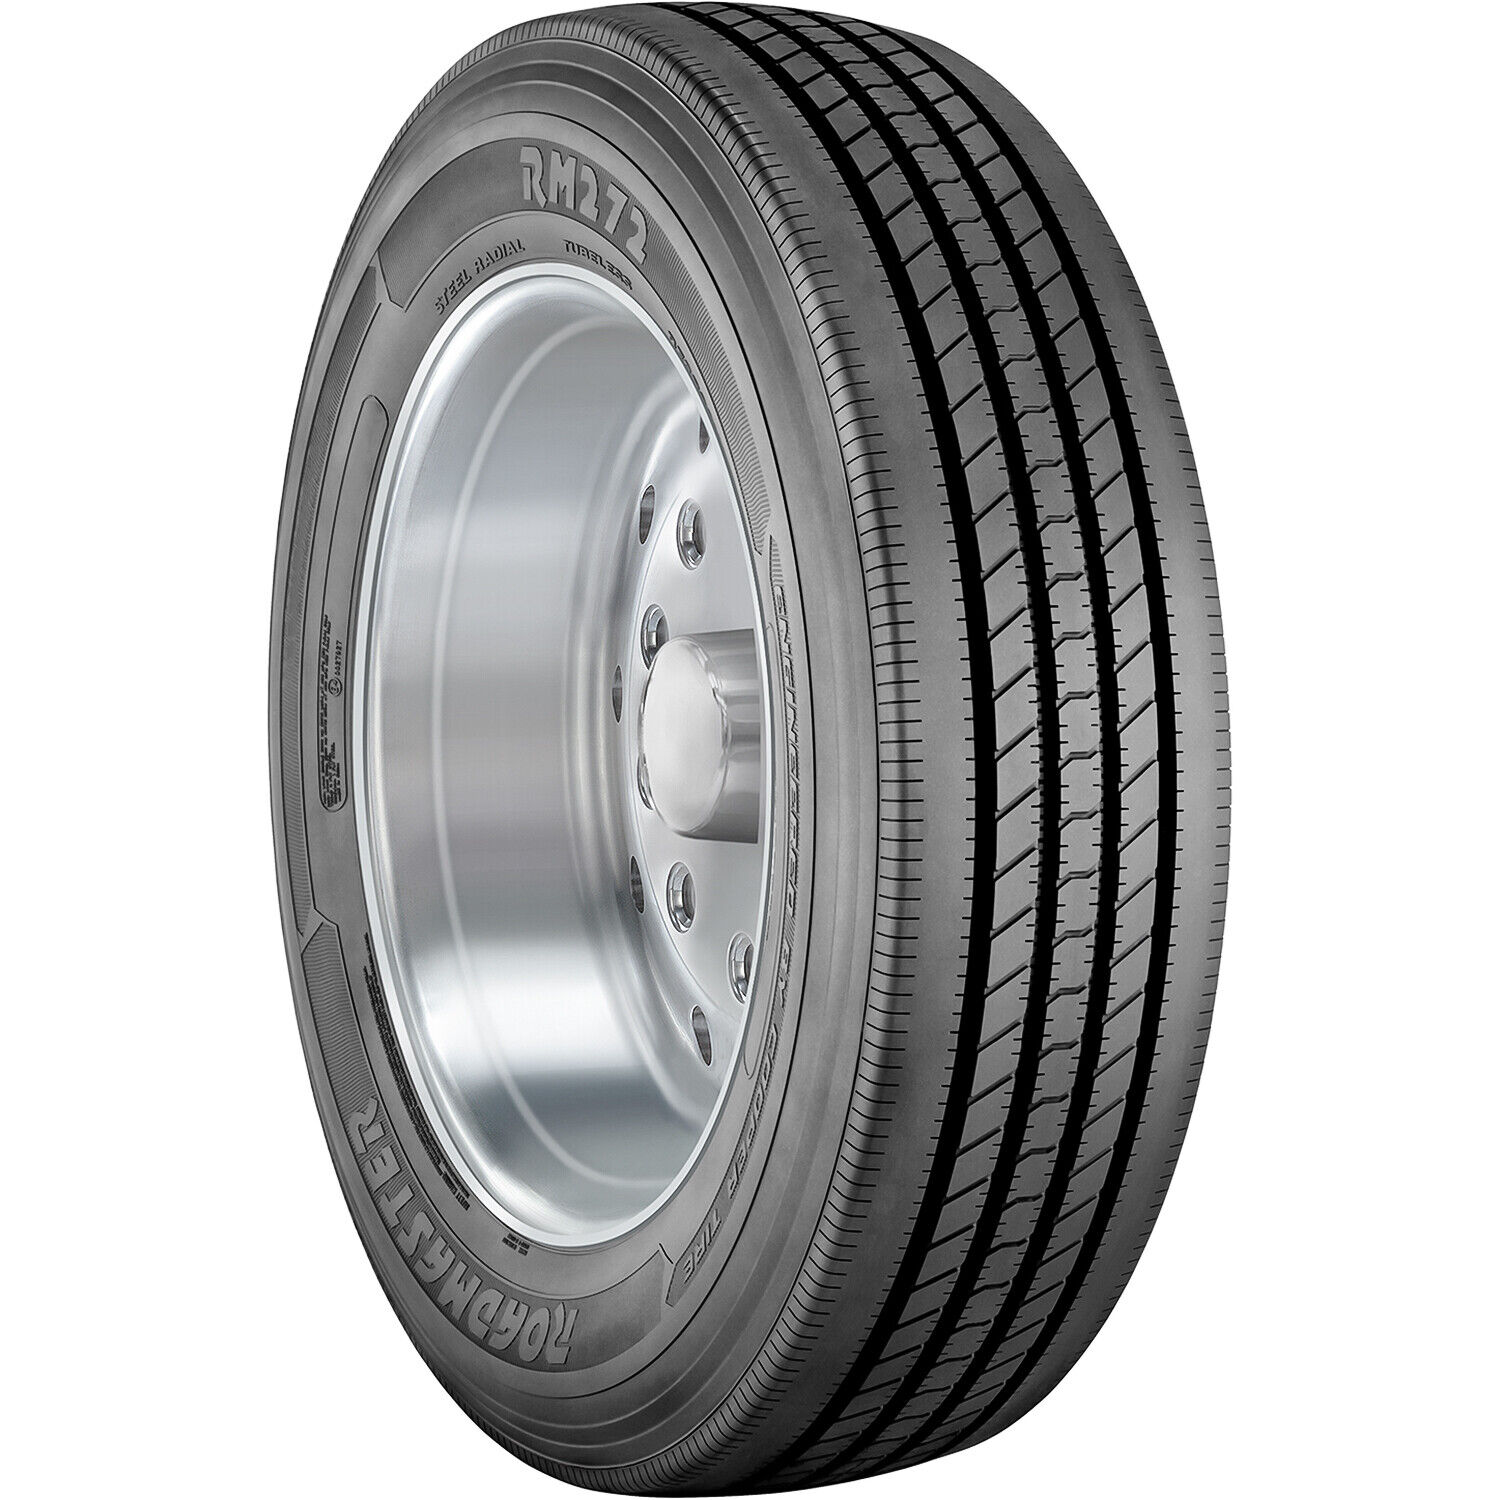 Tire Roadmaster (by Cooper) RM272 215/75R17.5 H 16 Ply All Position Commercial